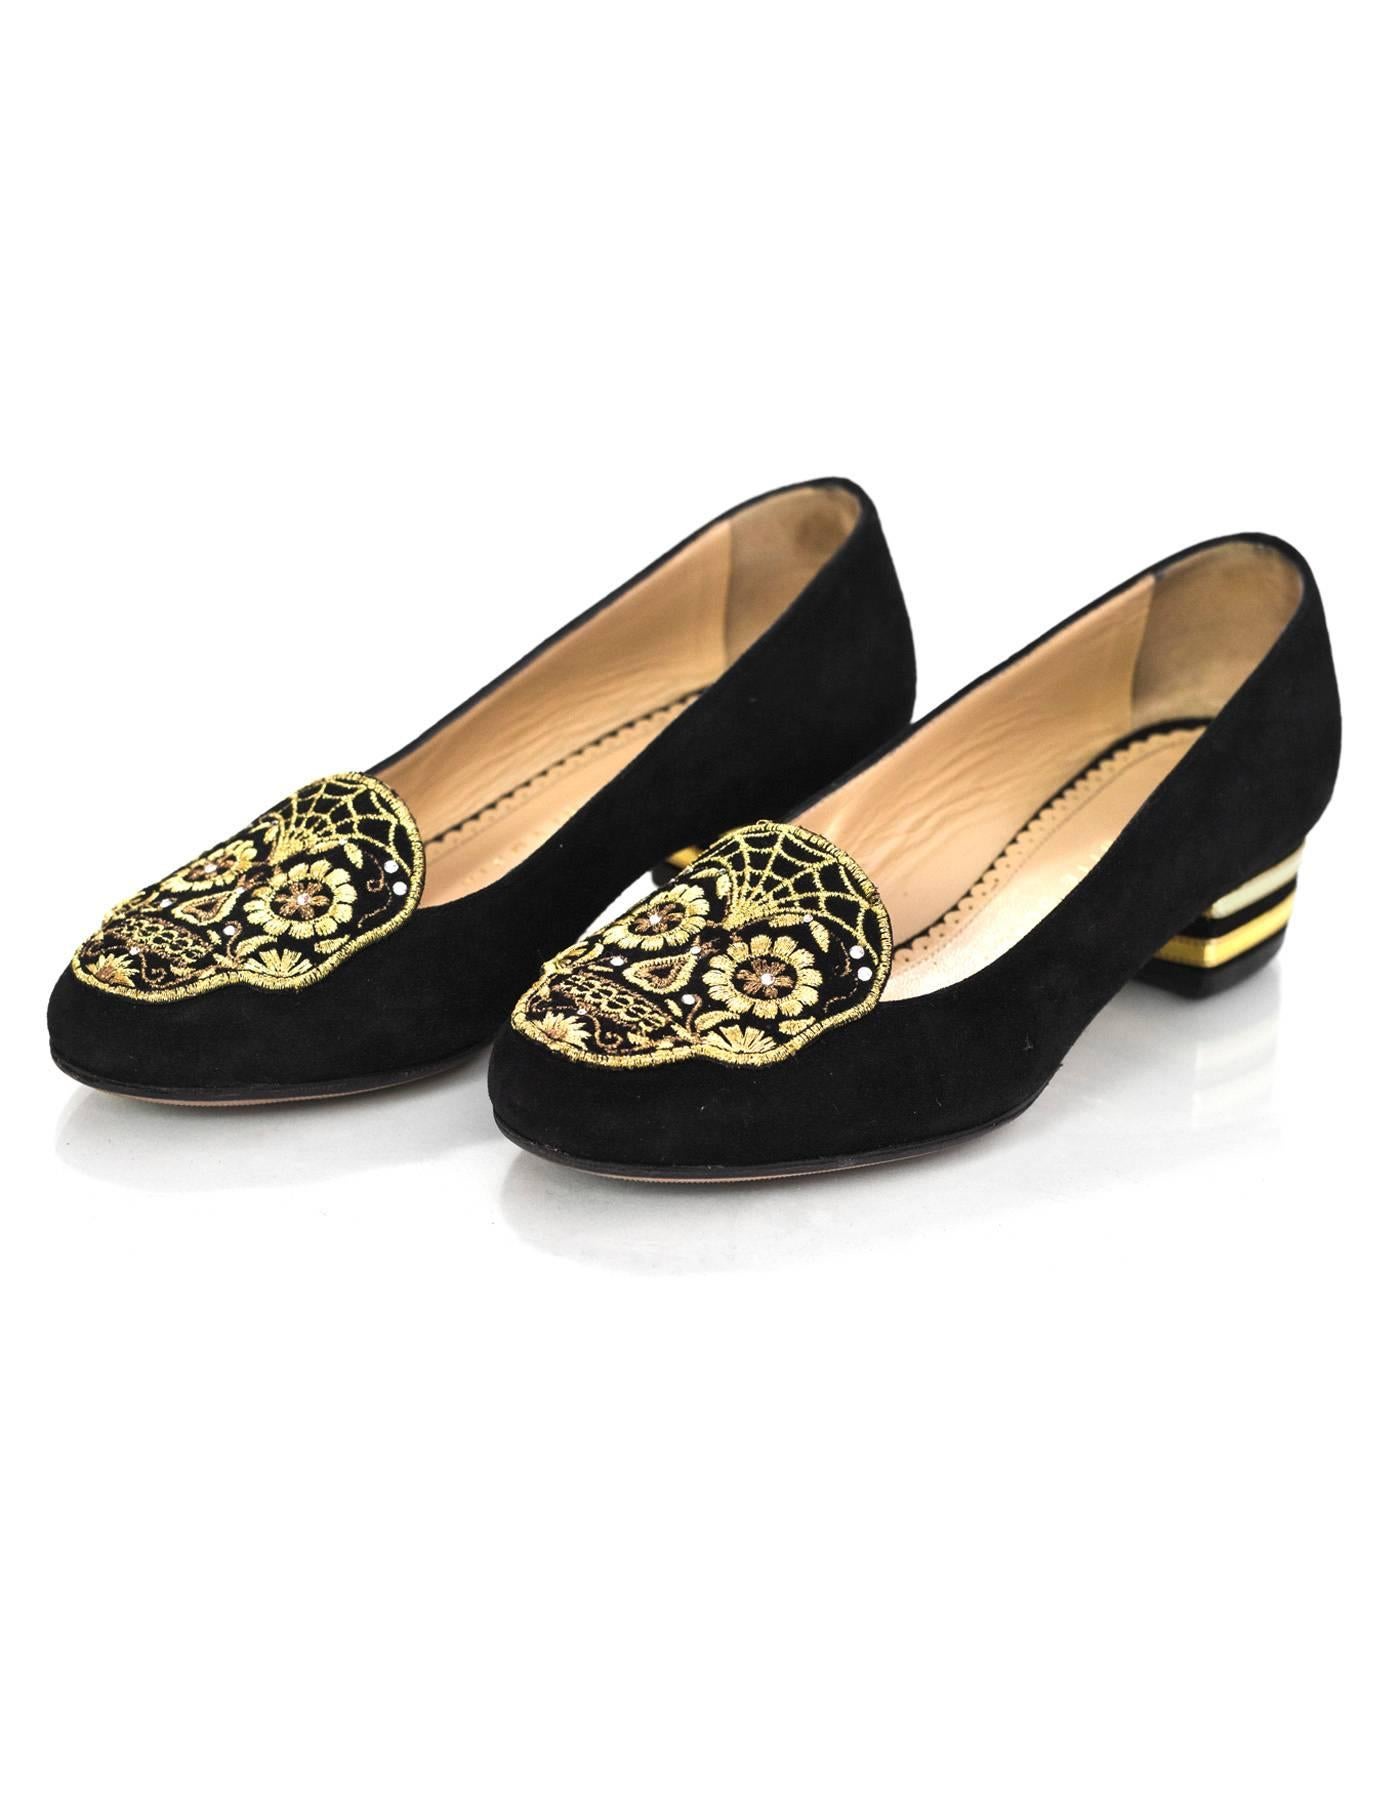 Charlotte Olympia Black Day Of The Dead Sugar Skull Loafers Sz 34

Made In: Italy
Color: Black, gold
Materials: Suede
Closure/Opening: Slide on
Sole Stamp: vero cuoio made in italy 34
Retail Price: $825 + tax
Overall Condition: Excellent pre-owned